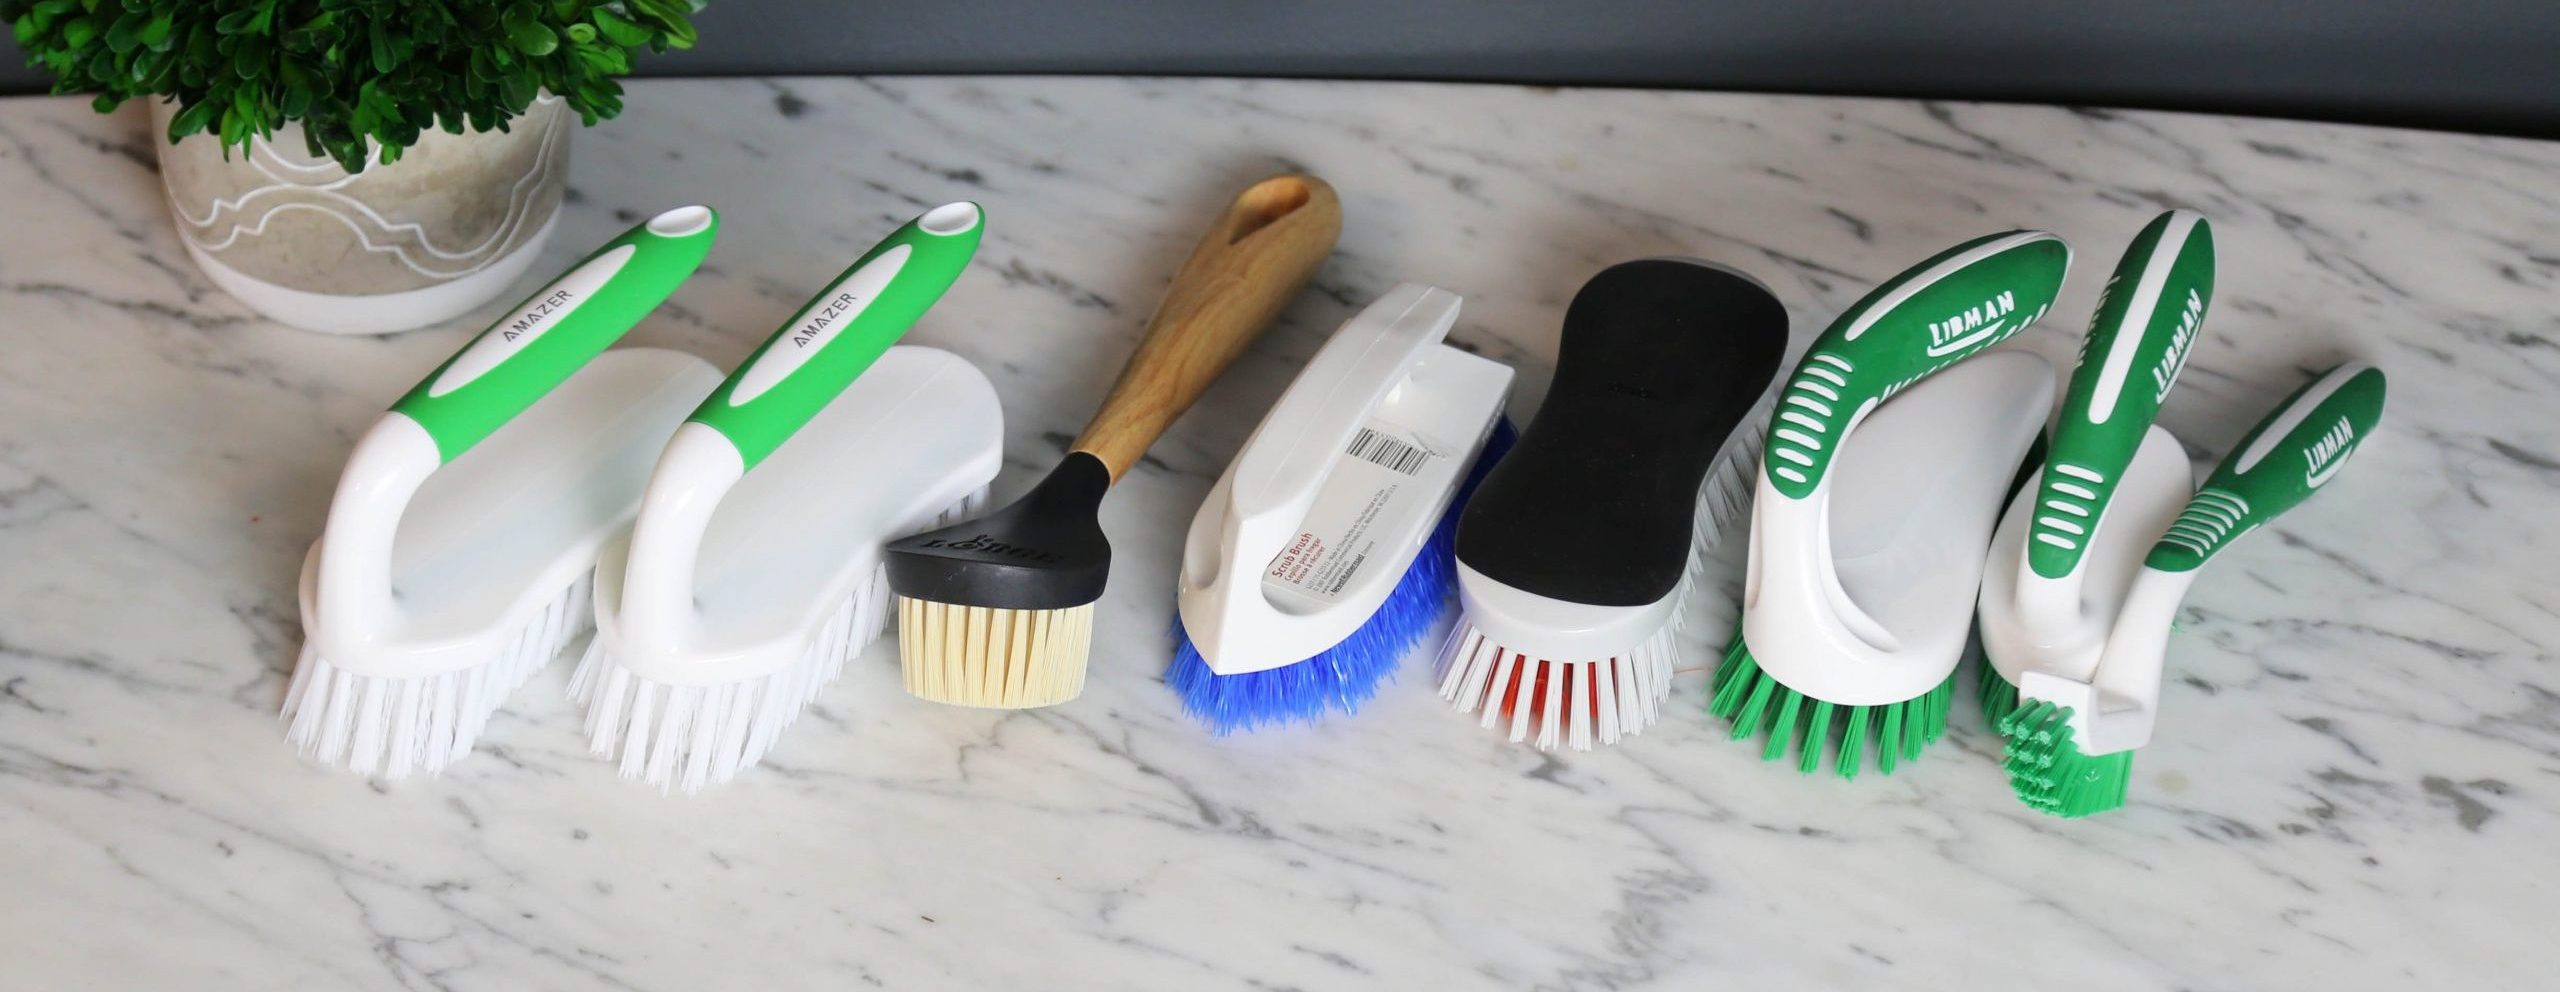 https://www.dontwasteyourmoney.com/wp-content/uploads/2020/04/cleaning-brush-all-review-ub-1-scaled-e1646160565118.jpg